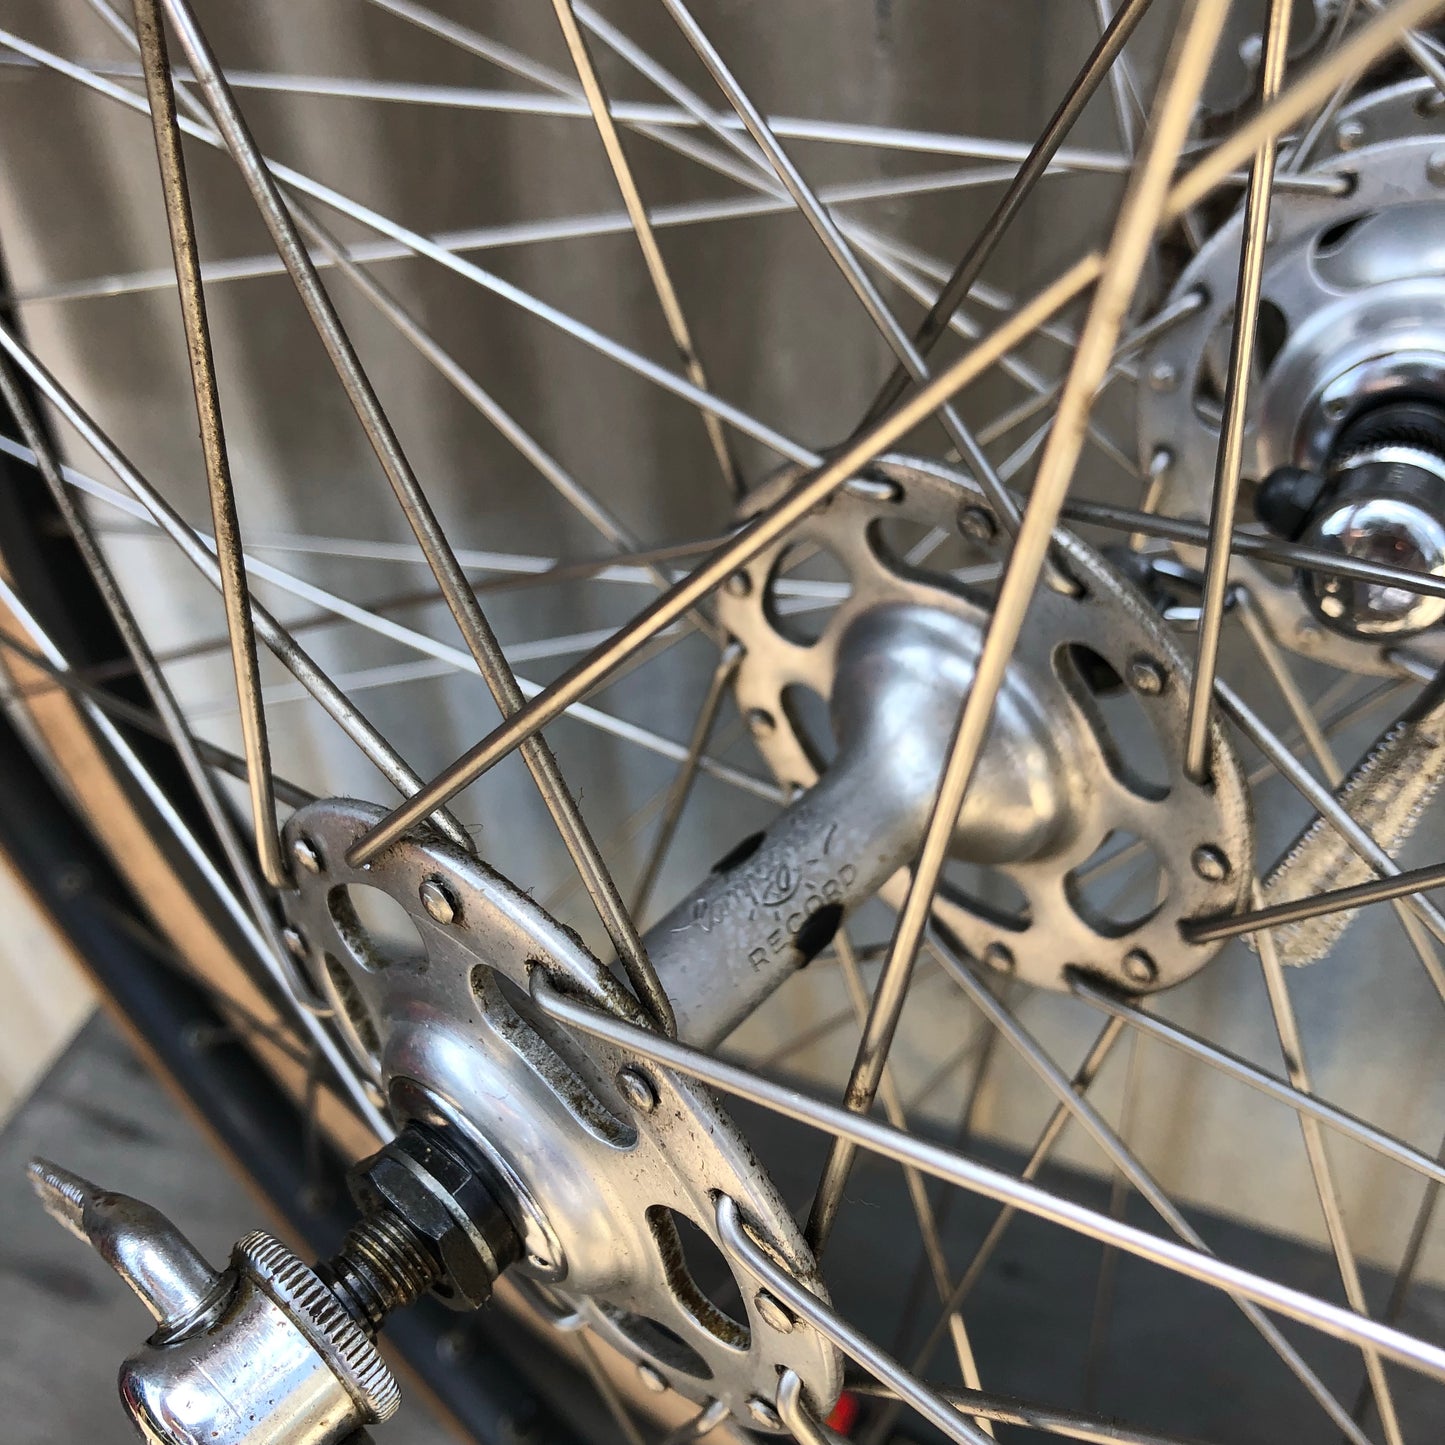 Vintage Campagnolo Wheelset - Record High Flange Hubs Laced with Stainless Spokes to Mavic MA-40s